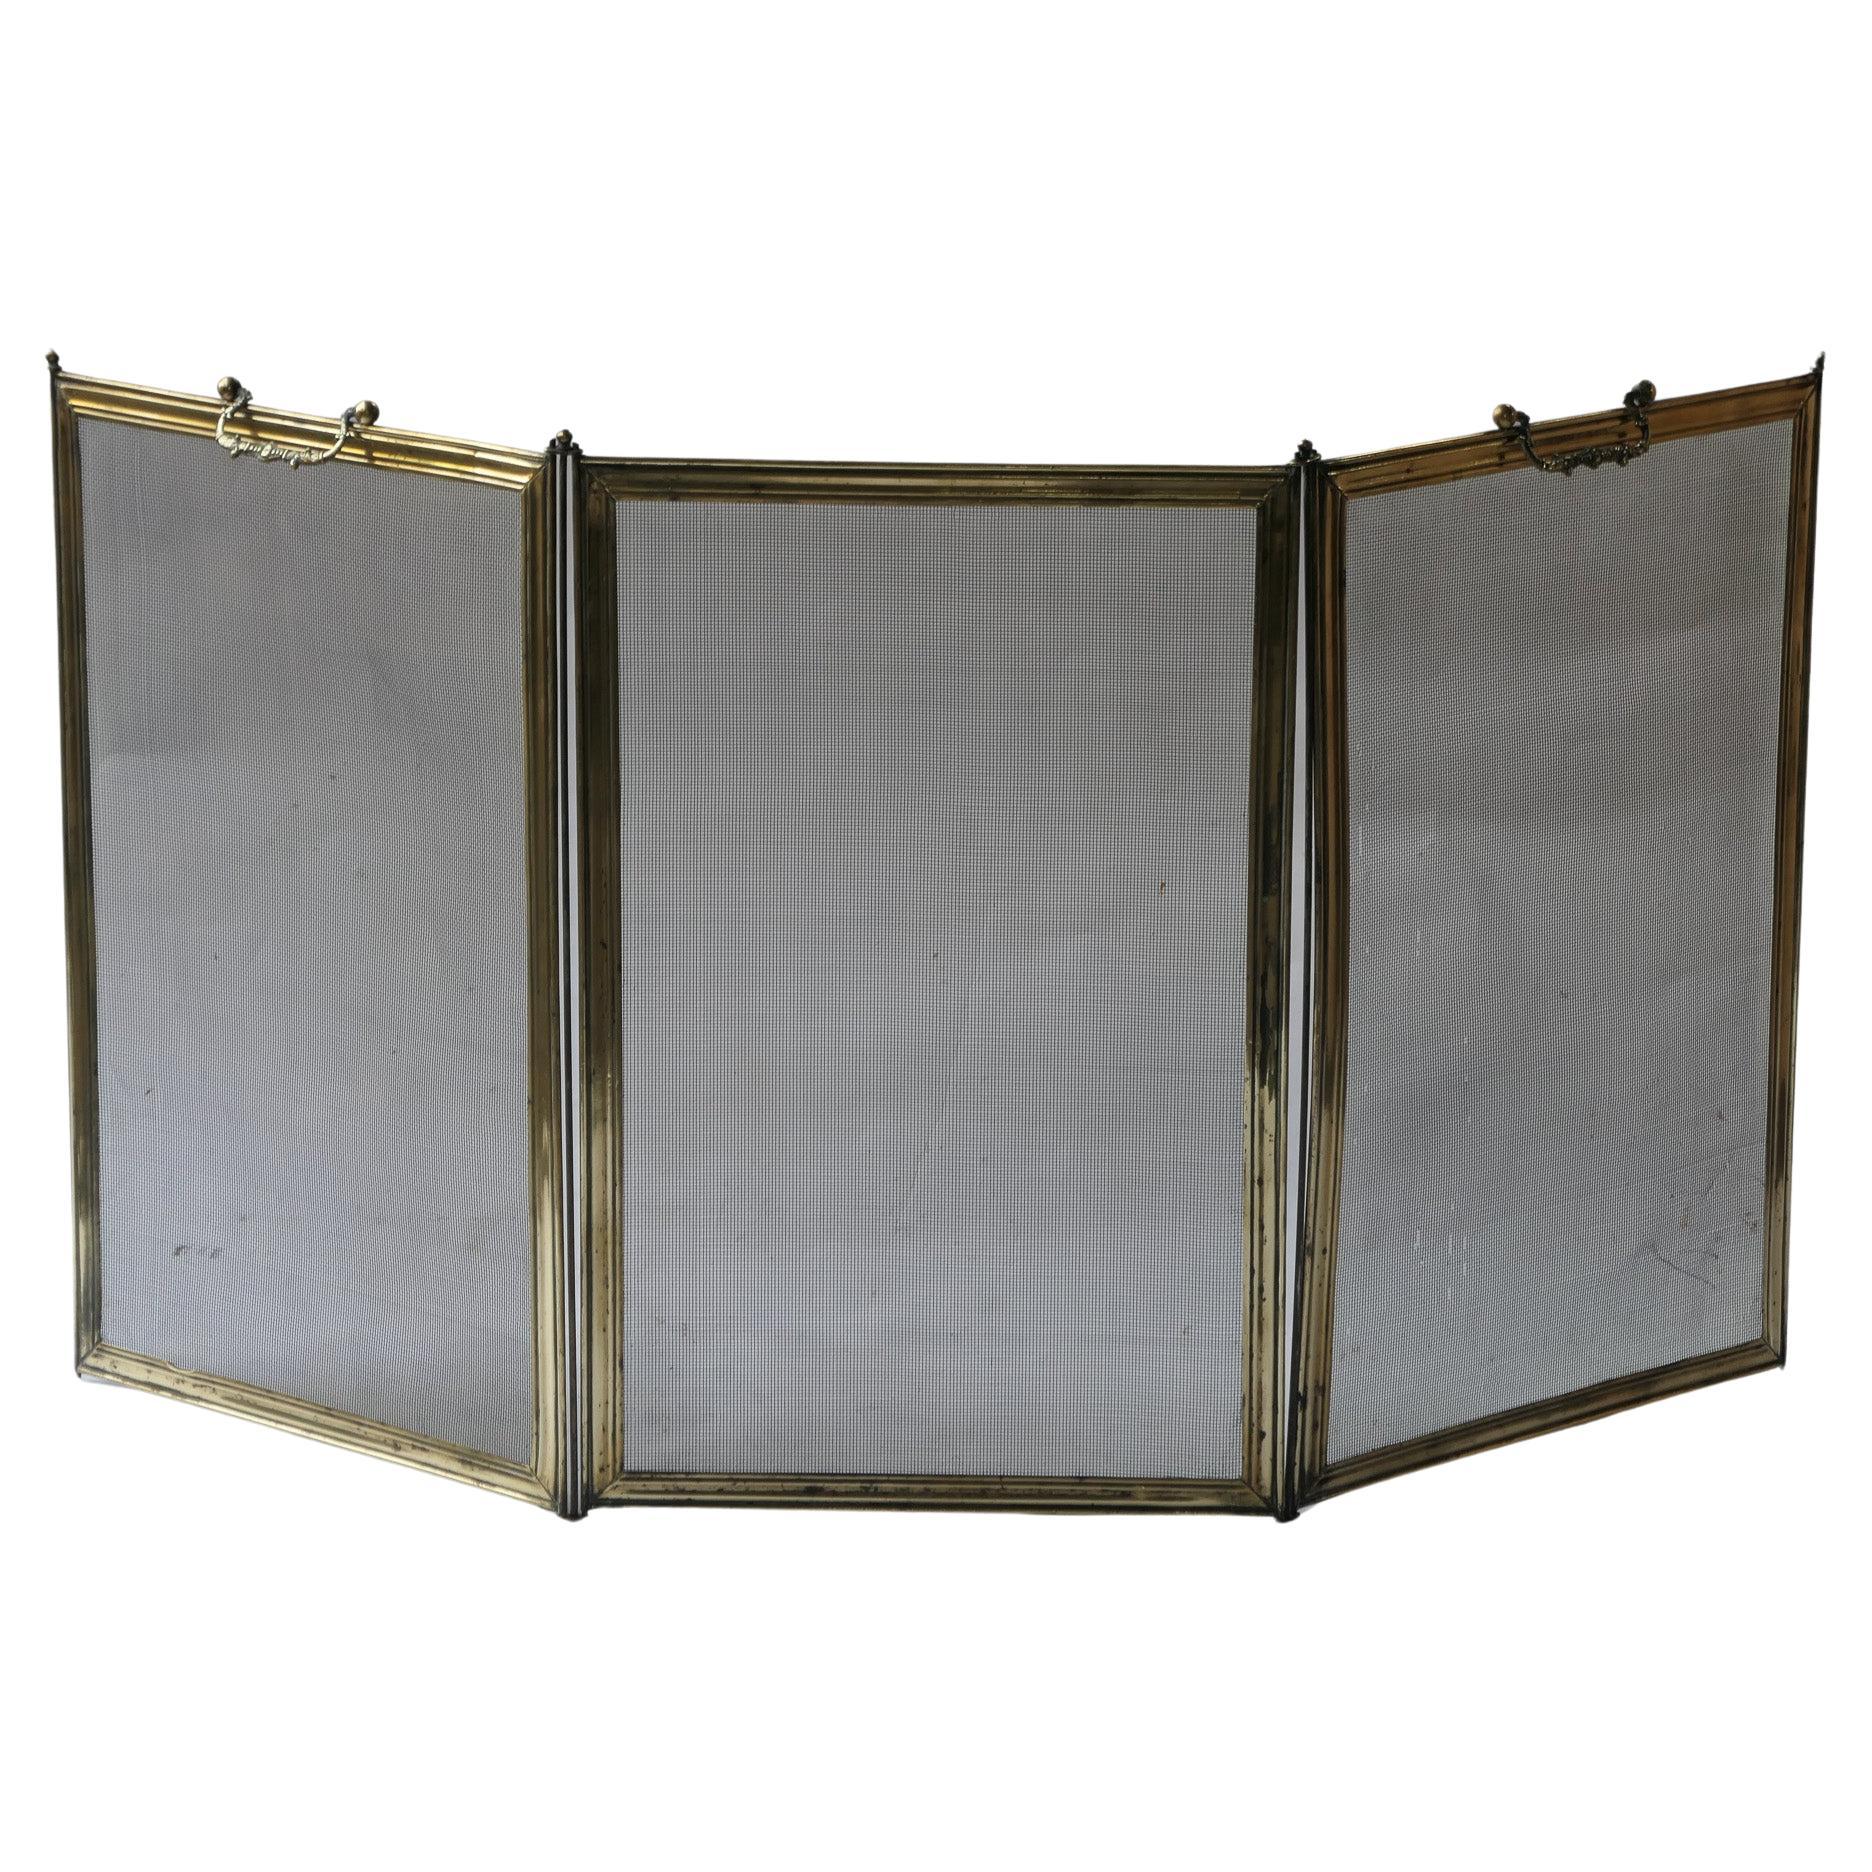 Antique French Polished Brass Napoleon III Fire Screen, 19th Century